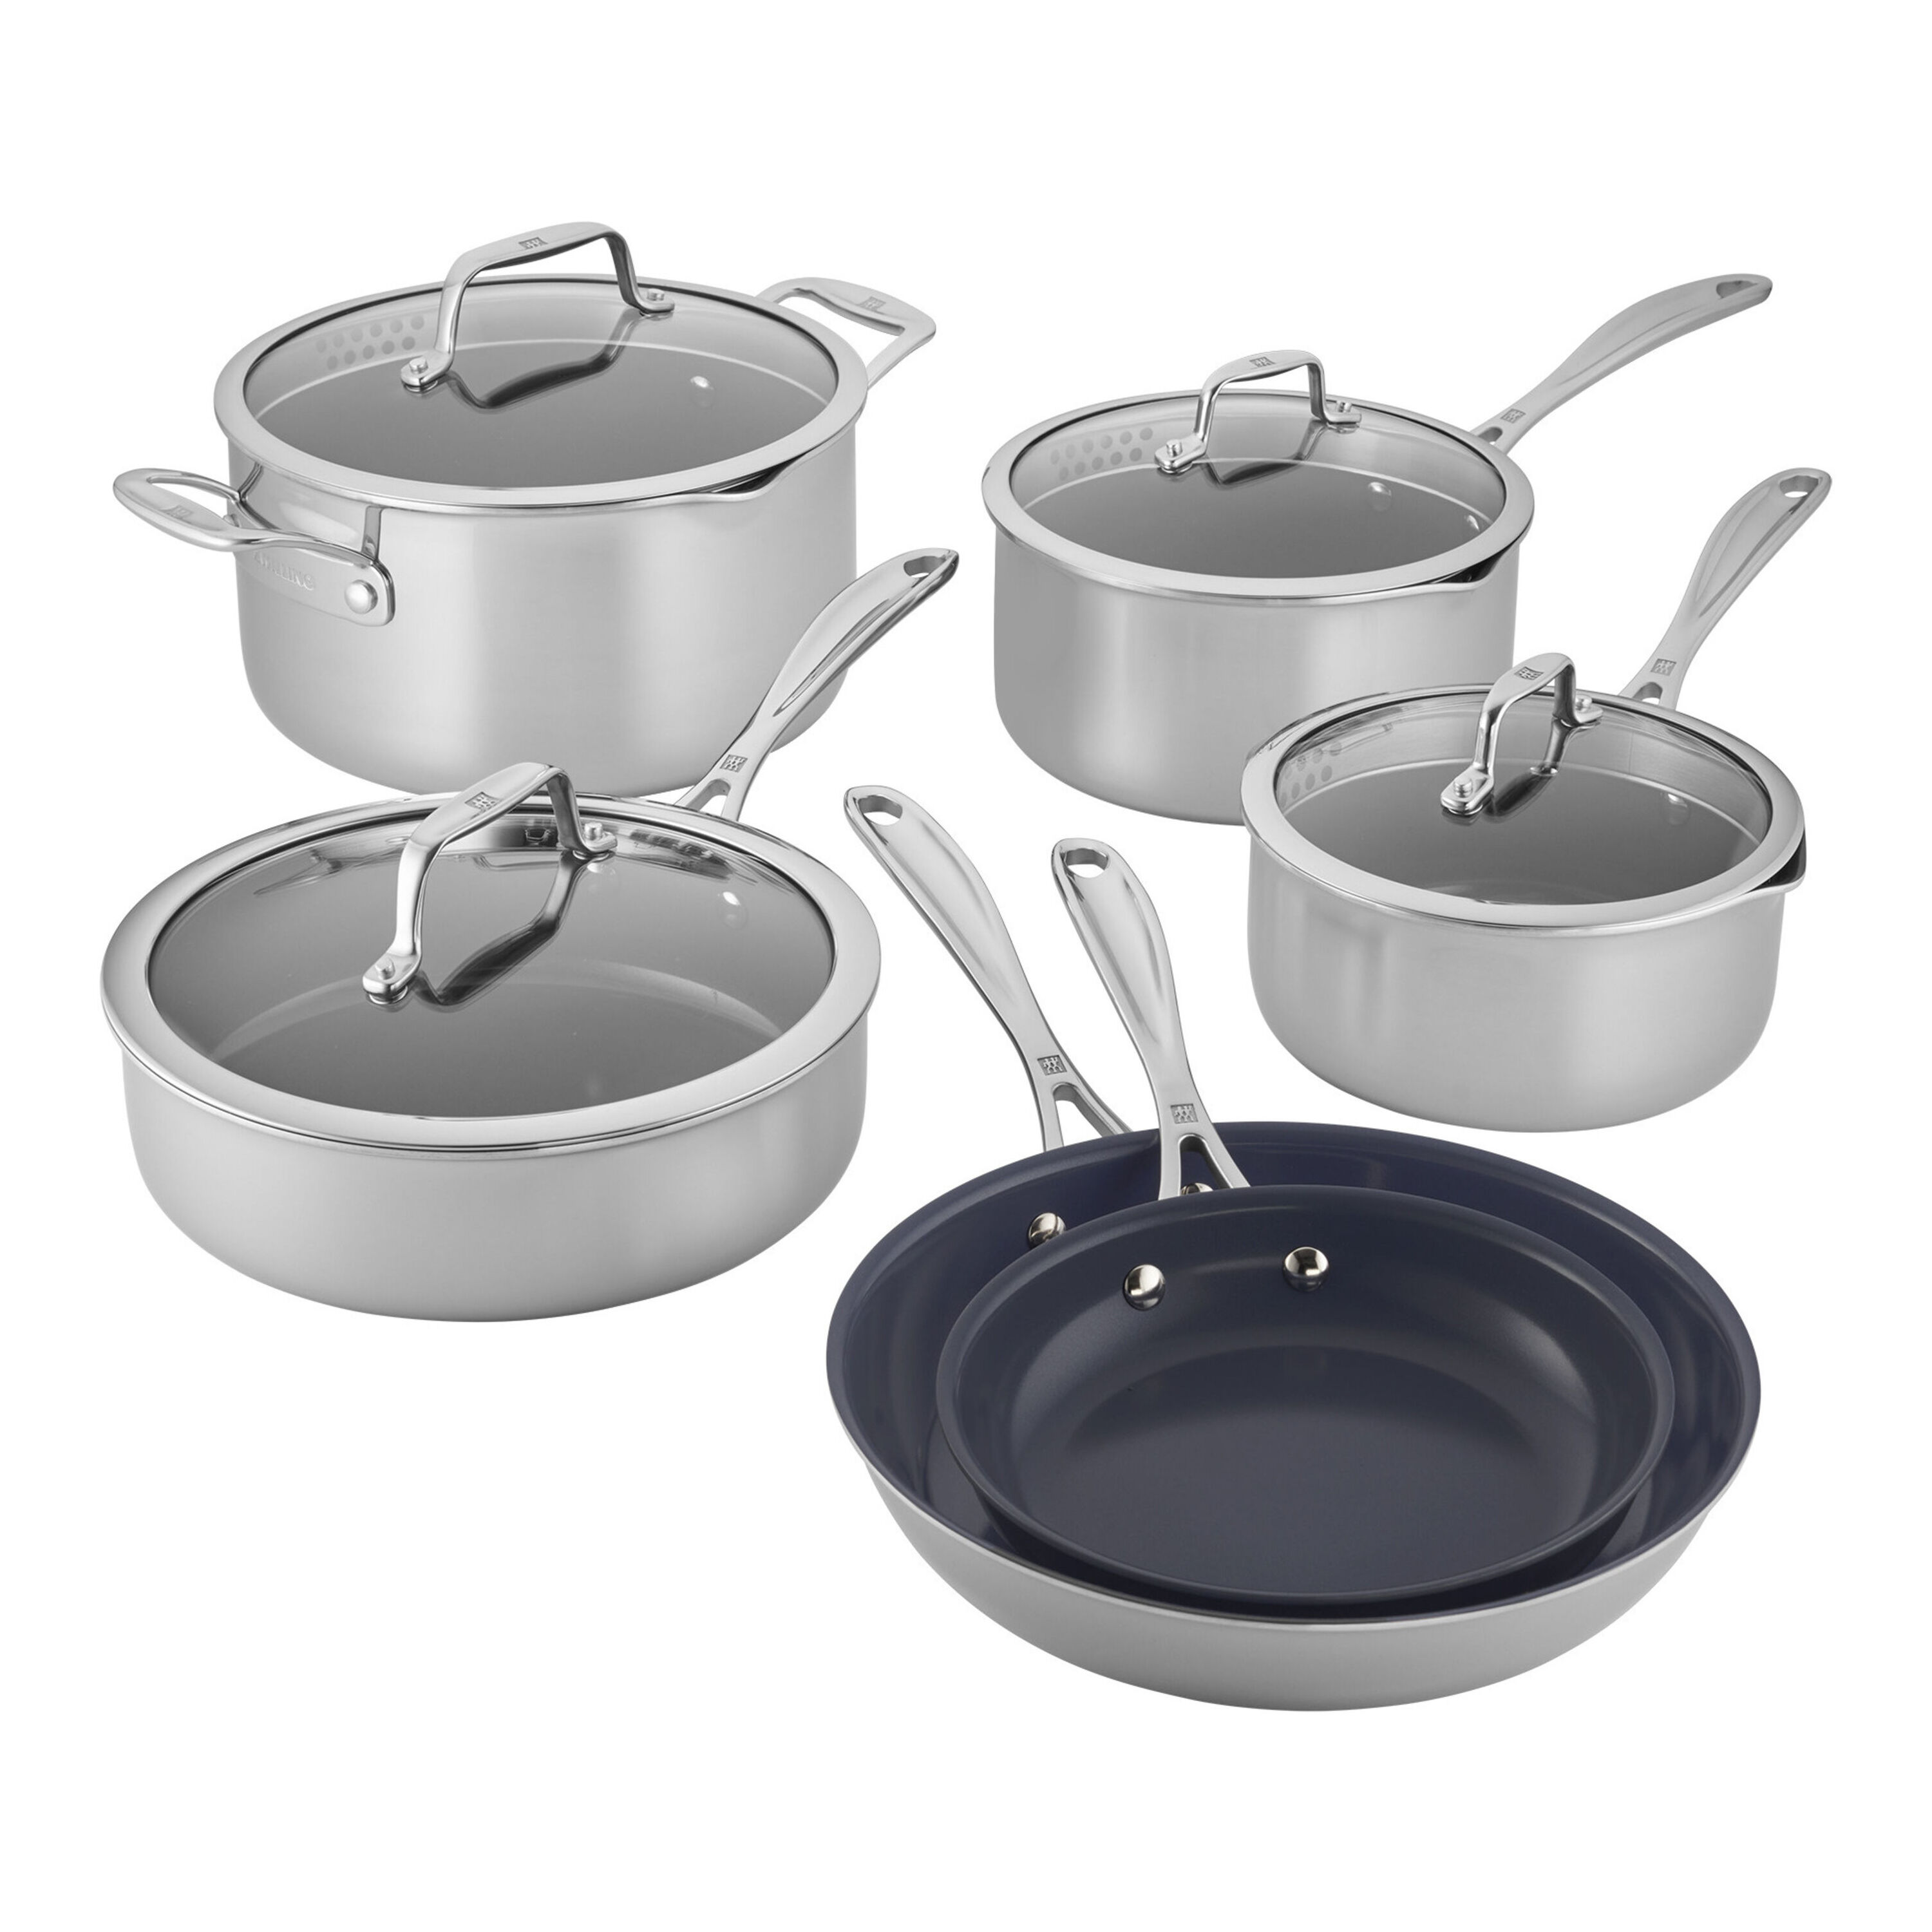 All-Clad vs. Zwilling (Which Cookware Is Better?) - Prudent Reviews